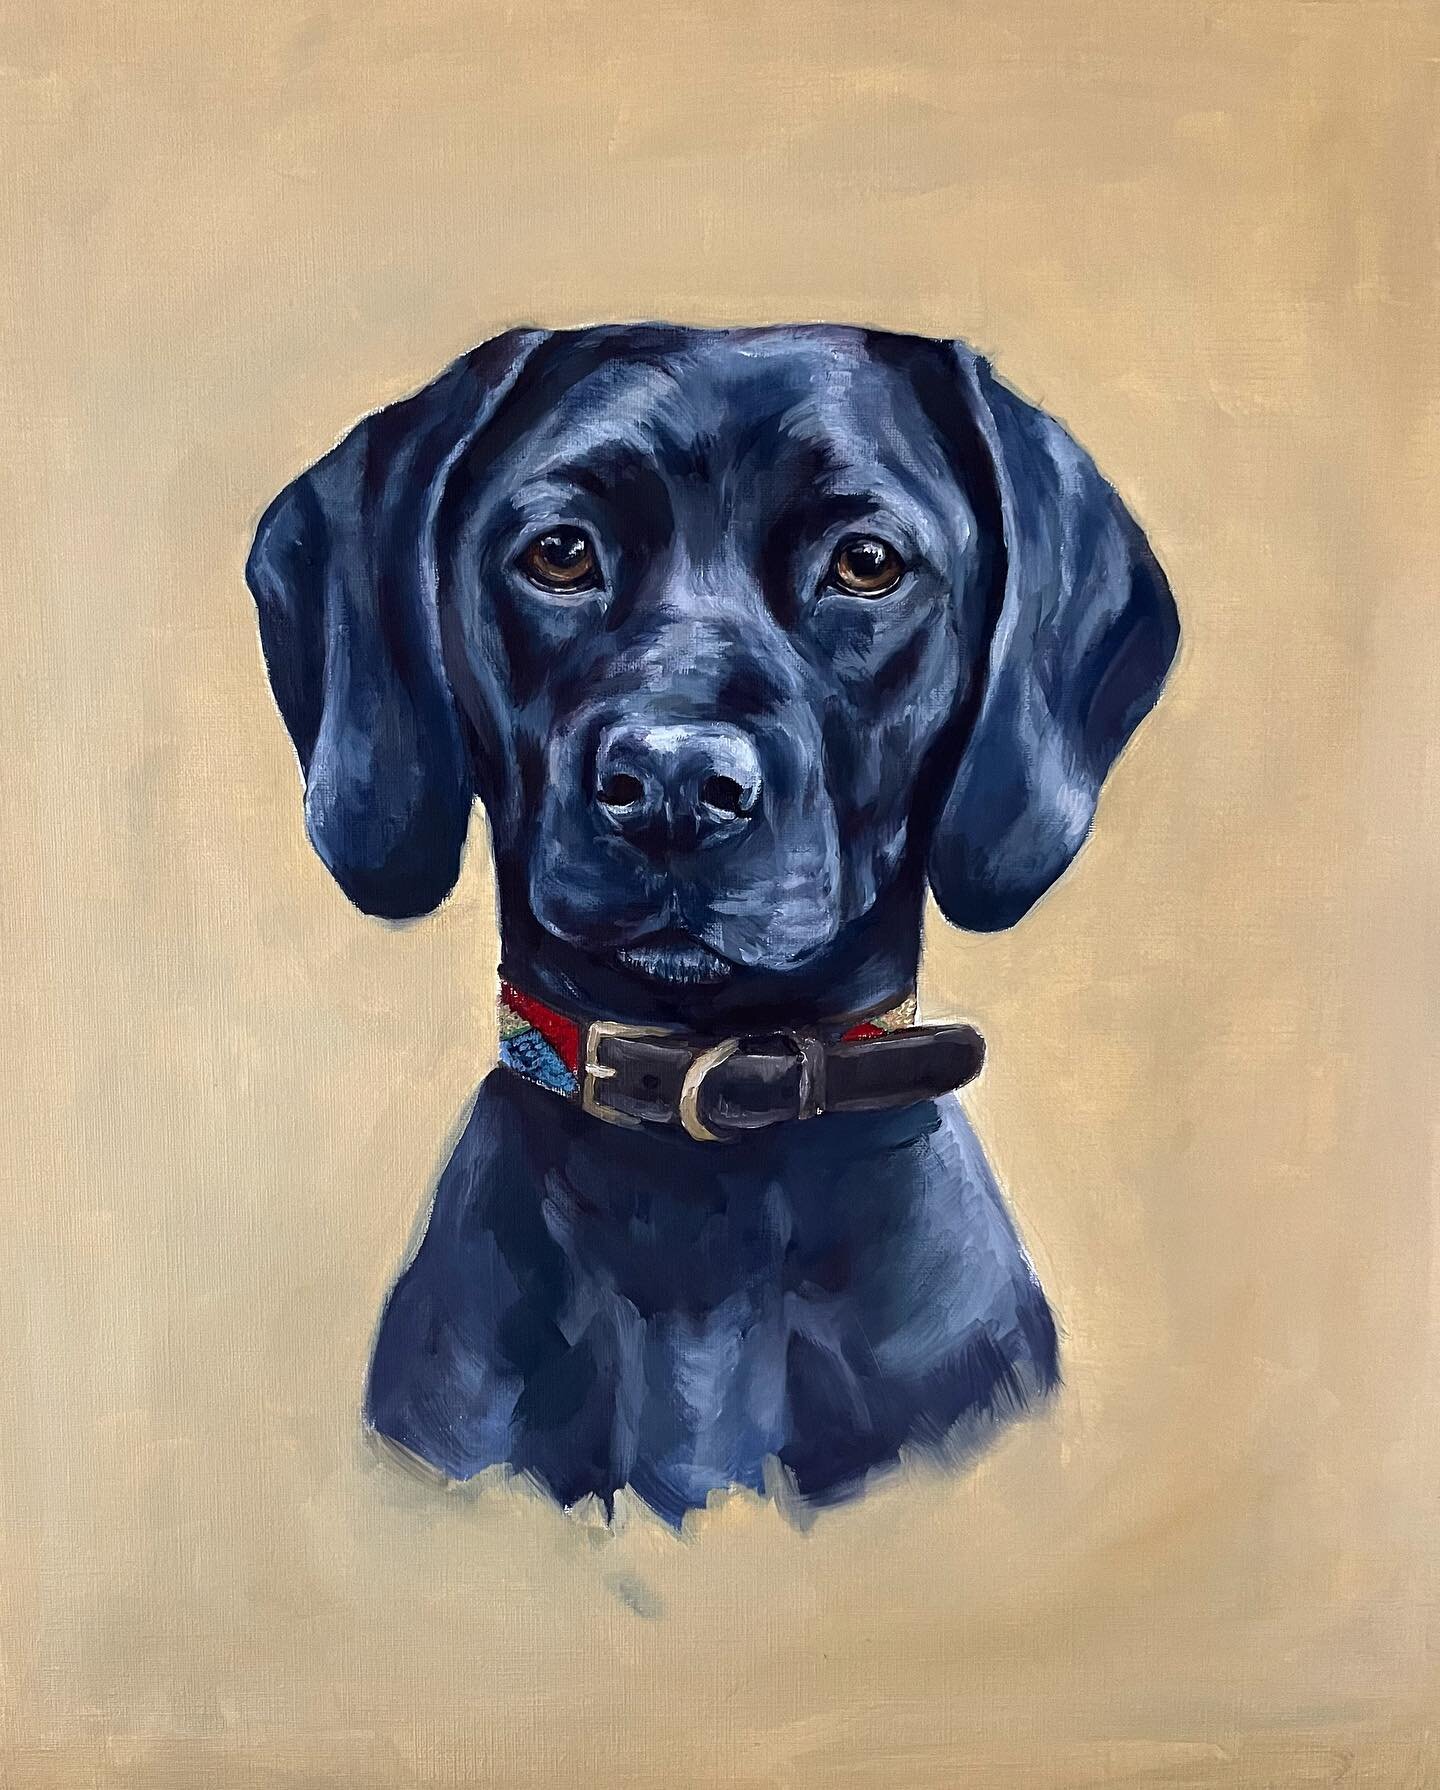 It is always so hard when you loose a best friend, I felt very honoured to be able to capture this lovely dog so she can live on in her owner&rsquo;s memory 🥰#portrait #oilpainting #commission #memories #capturethemoment #sophiehardenart